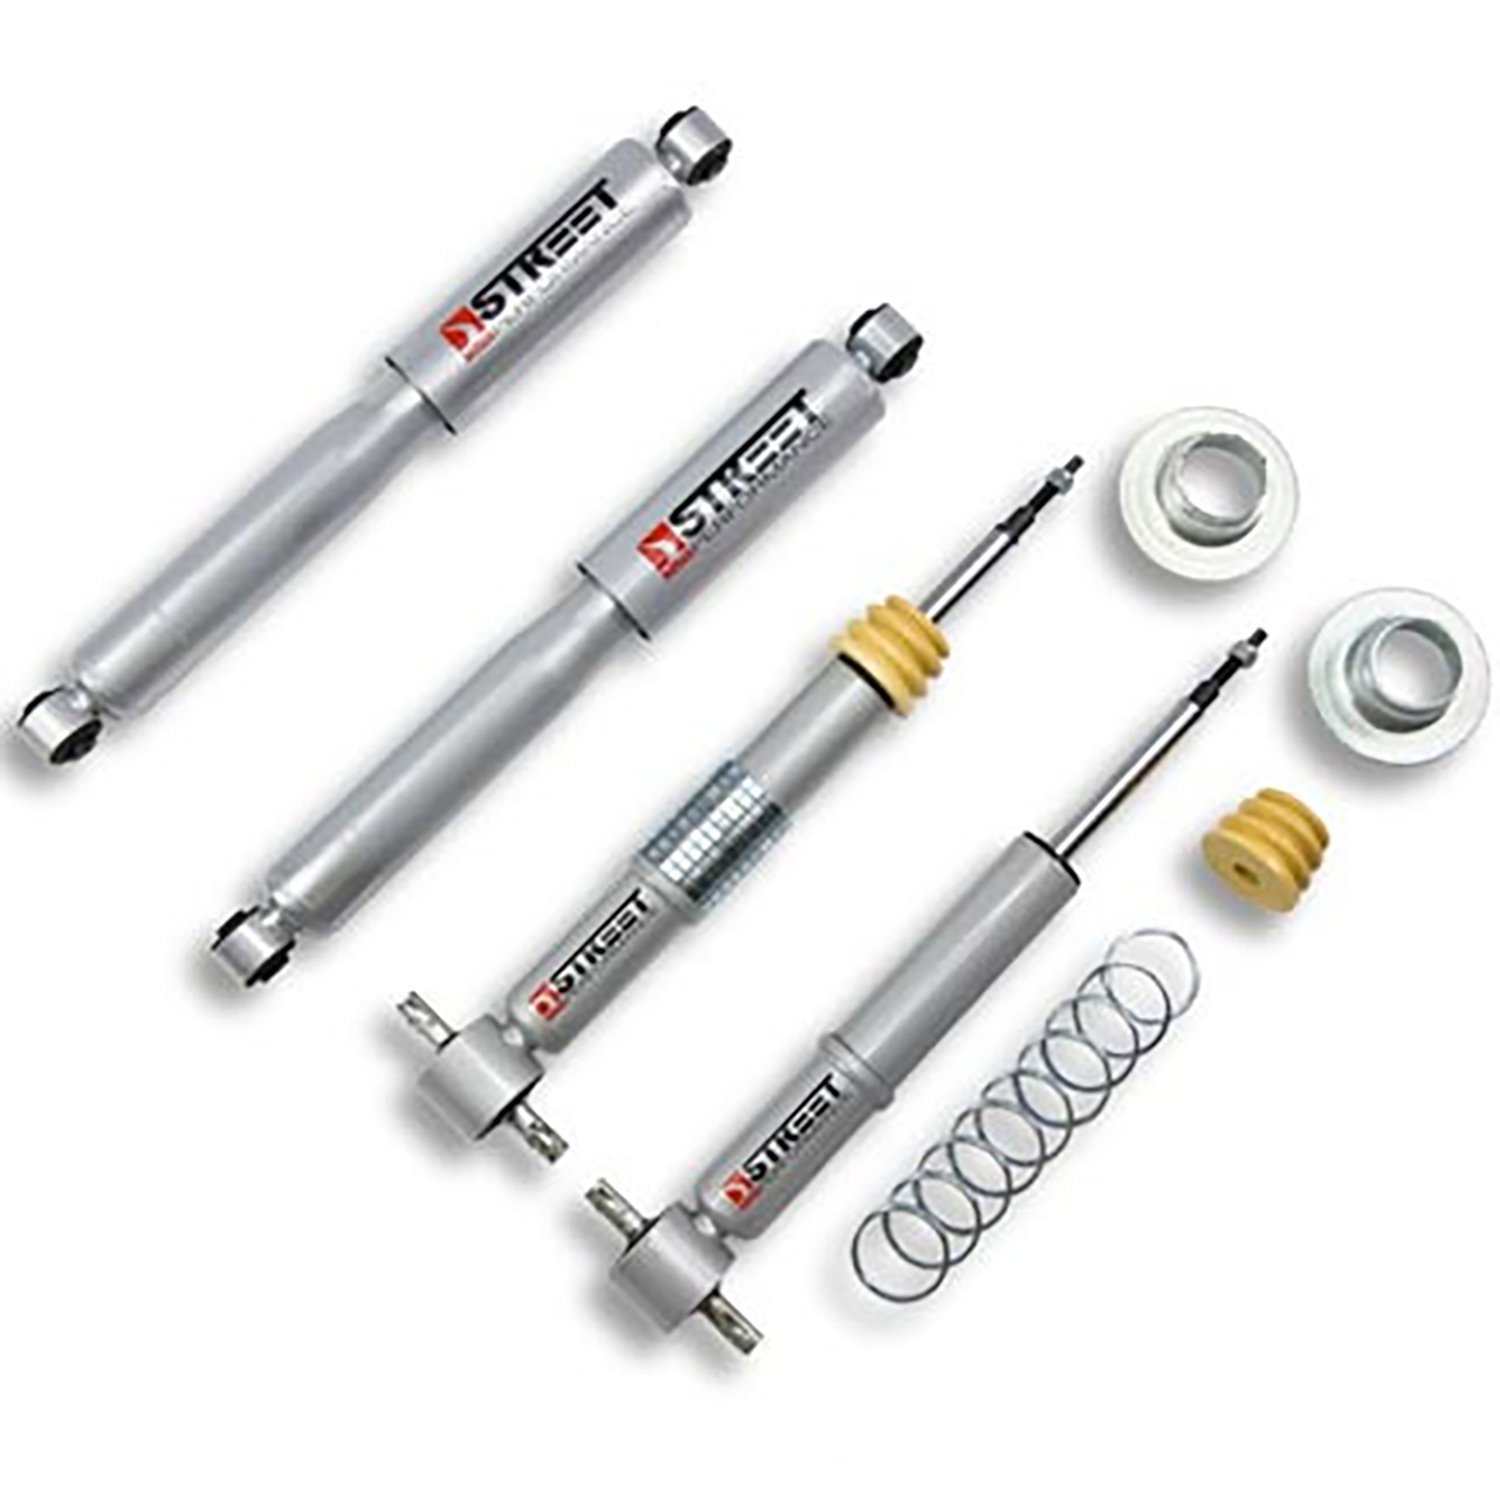 Street Performance Shock Set for Lowered 2007-2013 Chevy/GMC 1500 2WD Pickup Truck